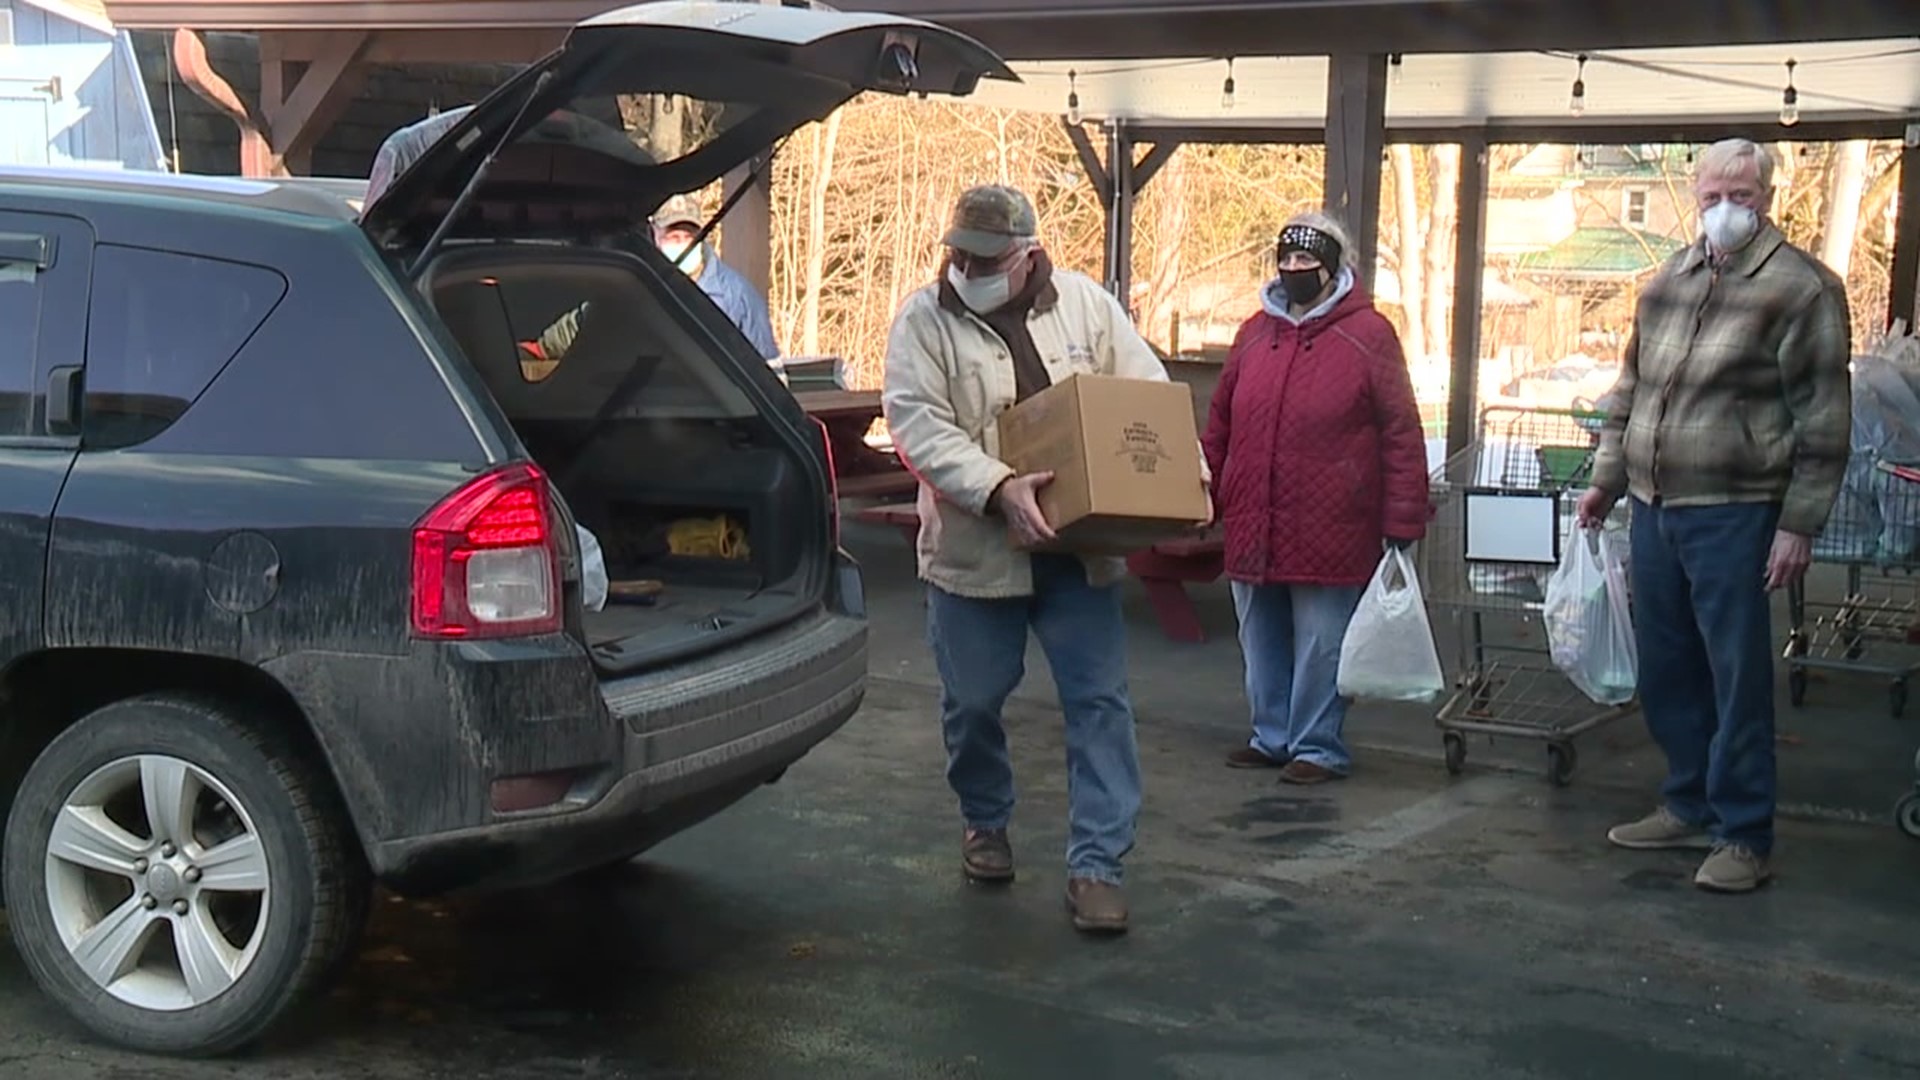 Every month, American Legion Post 36 in Jersey Shore passes out food to veterans.